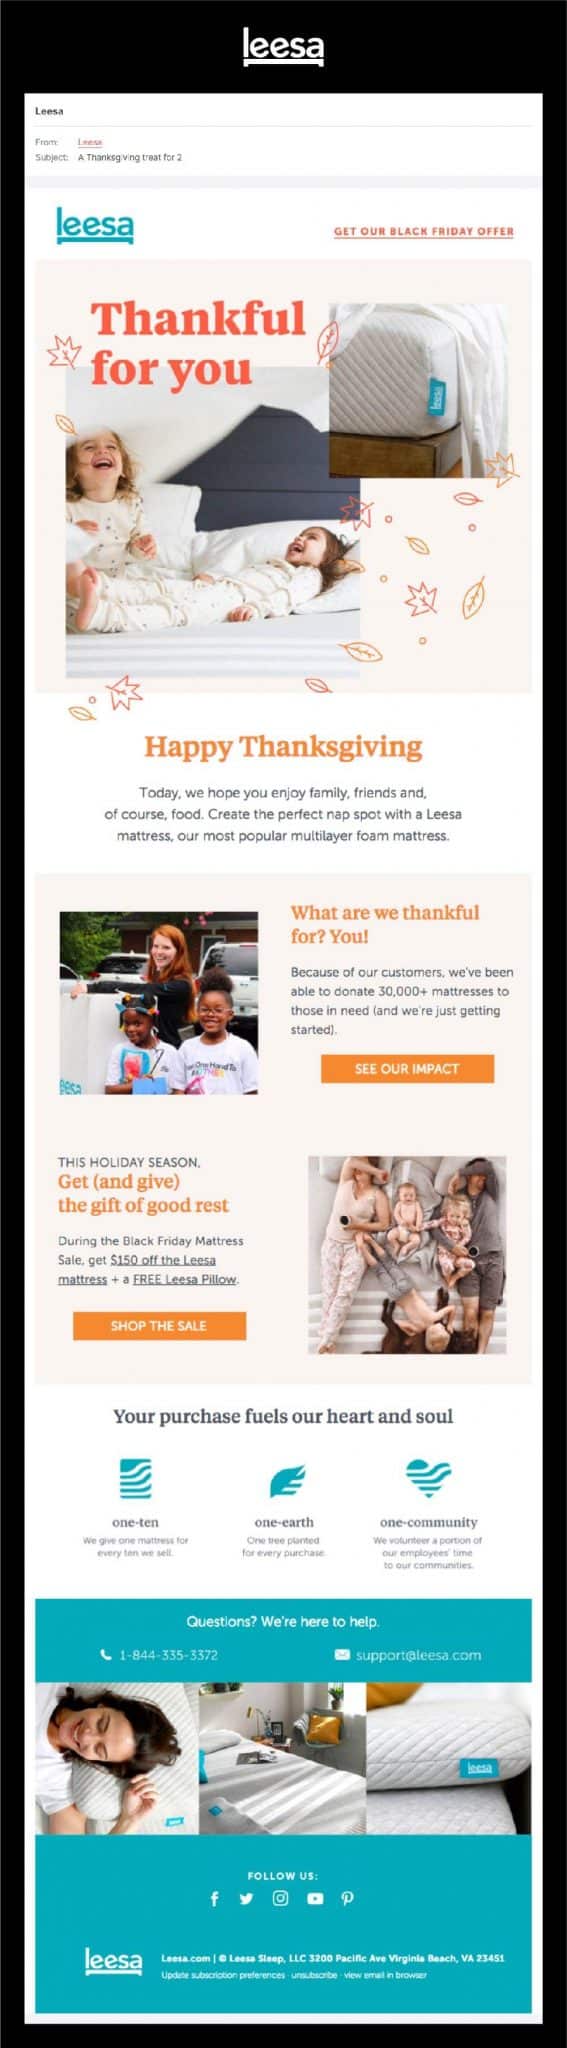 Leesa email newsletter showing two little girls playful on a comfortable mattress black firday sale for holiday season family laying peacefully happy thanksgiving donation